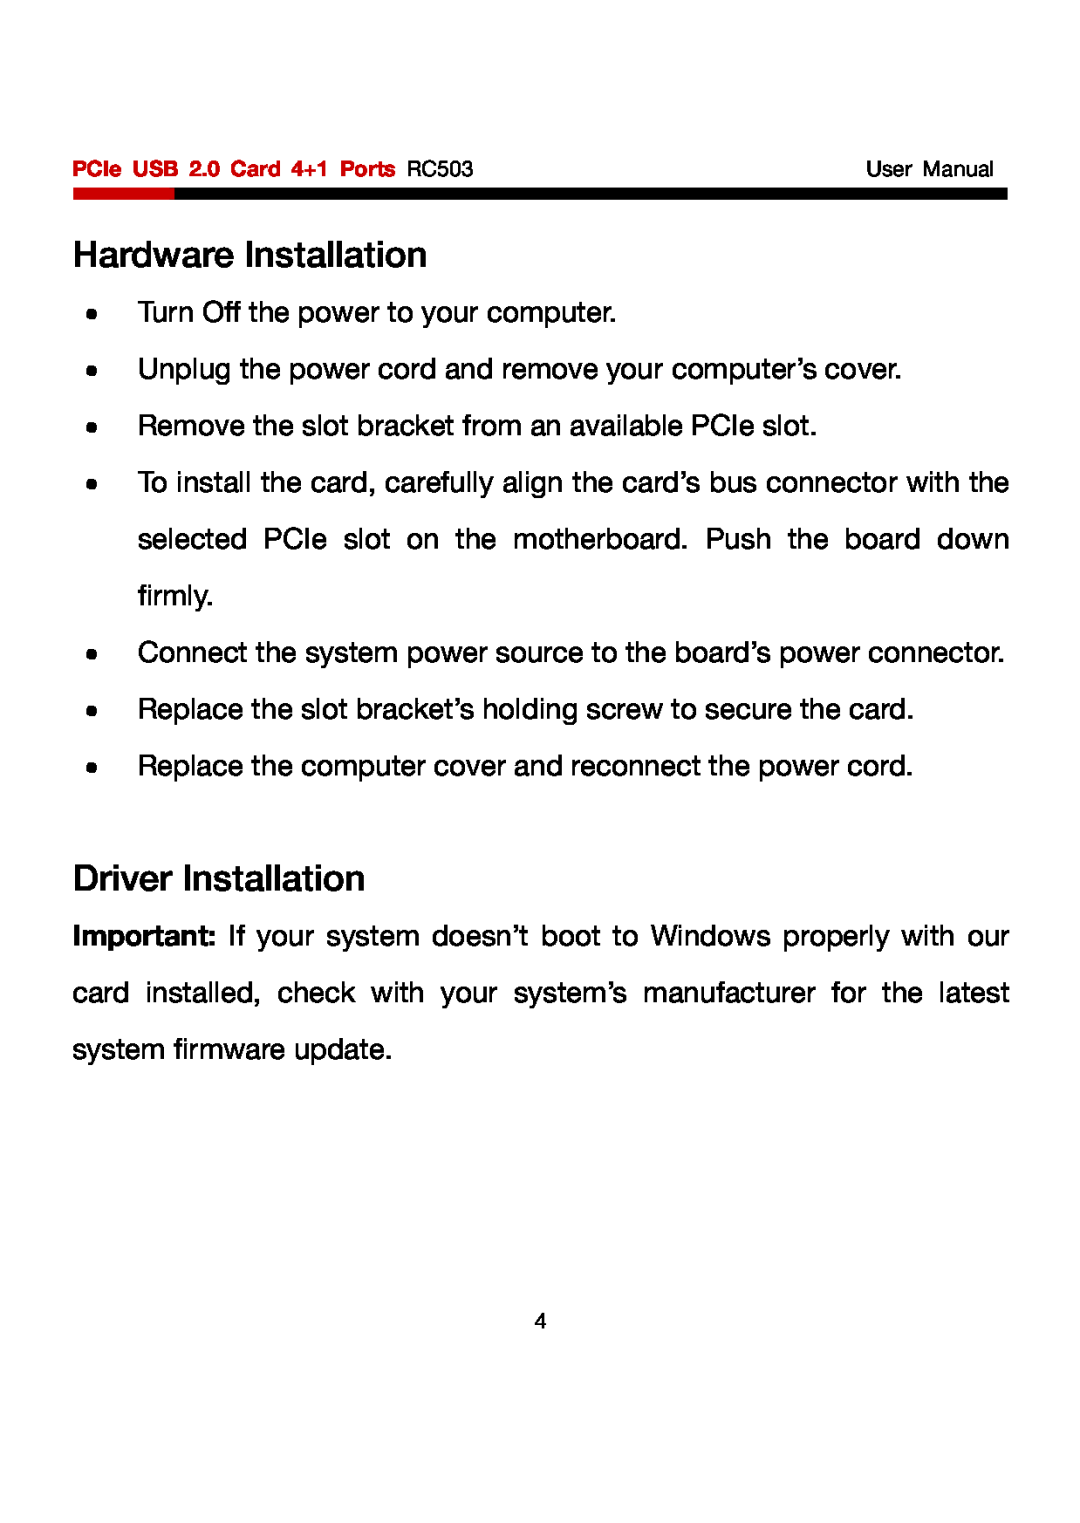 Rosewill RC503 user manual Hardware Installation, Driver Installation 